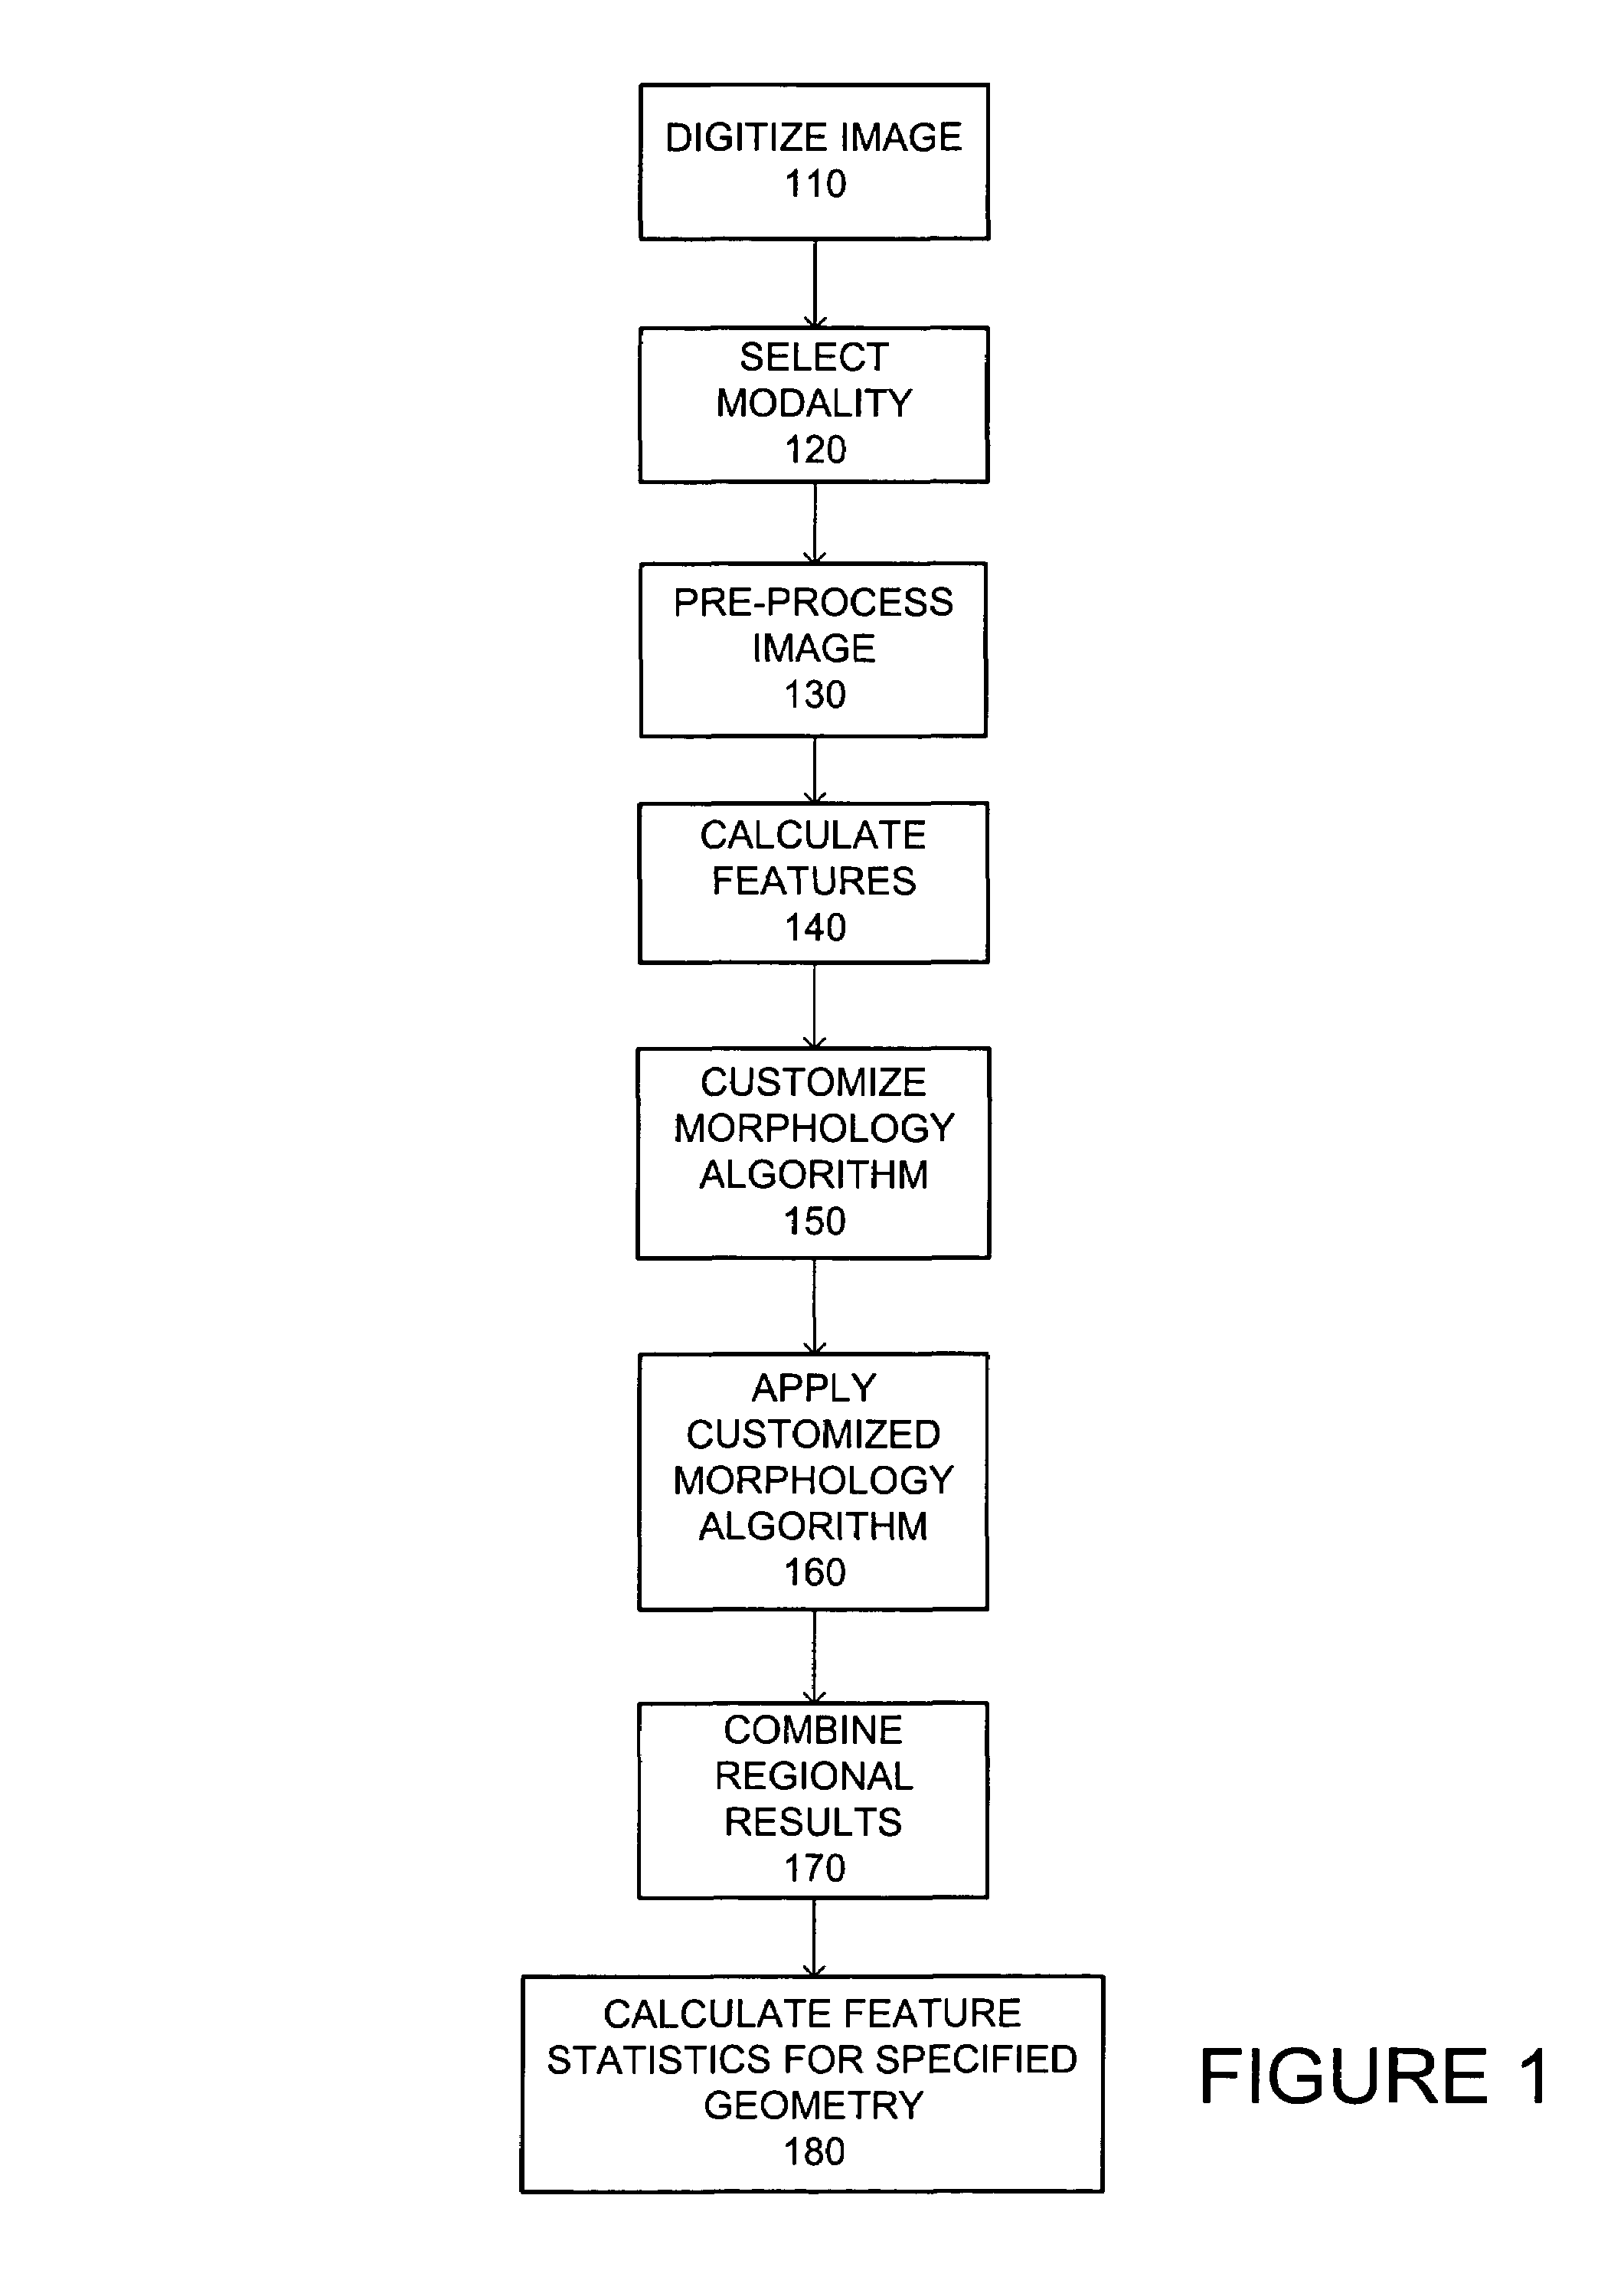 System and method for automation of morphological segmentation of bio-images